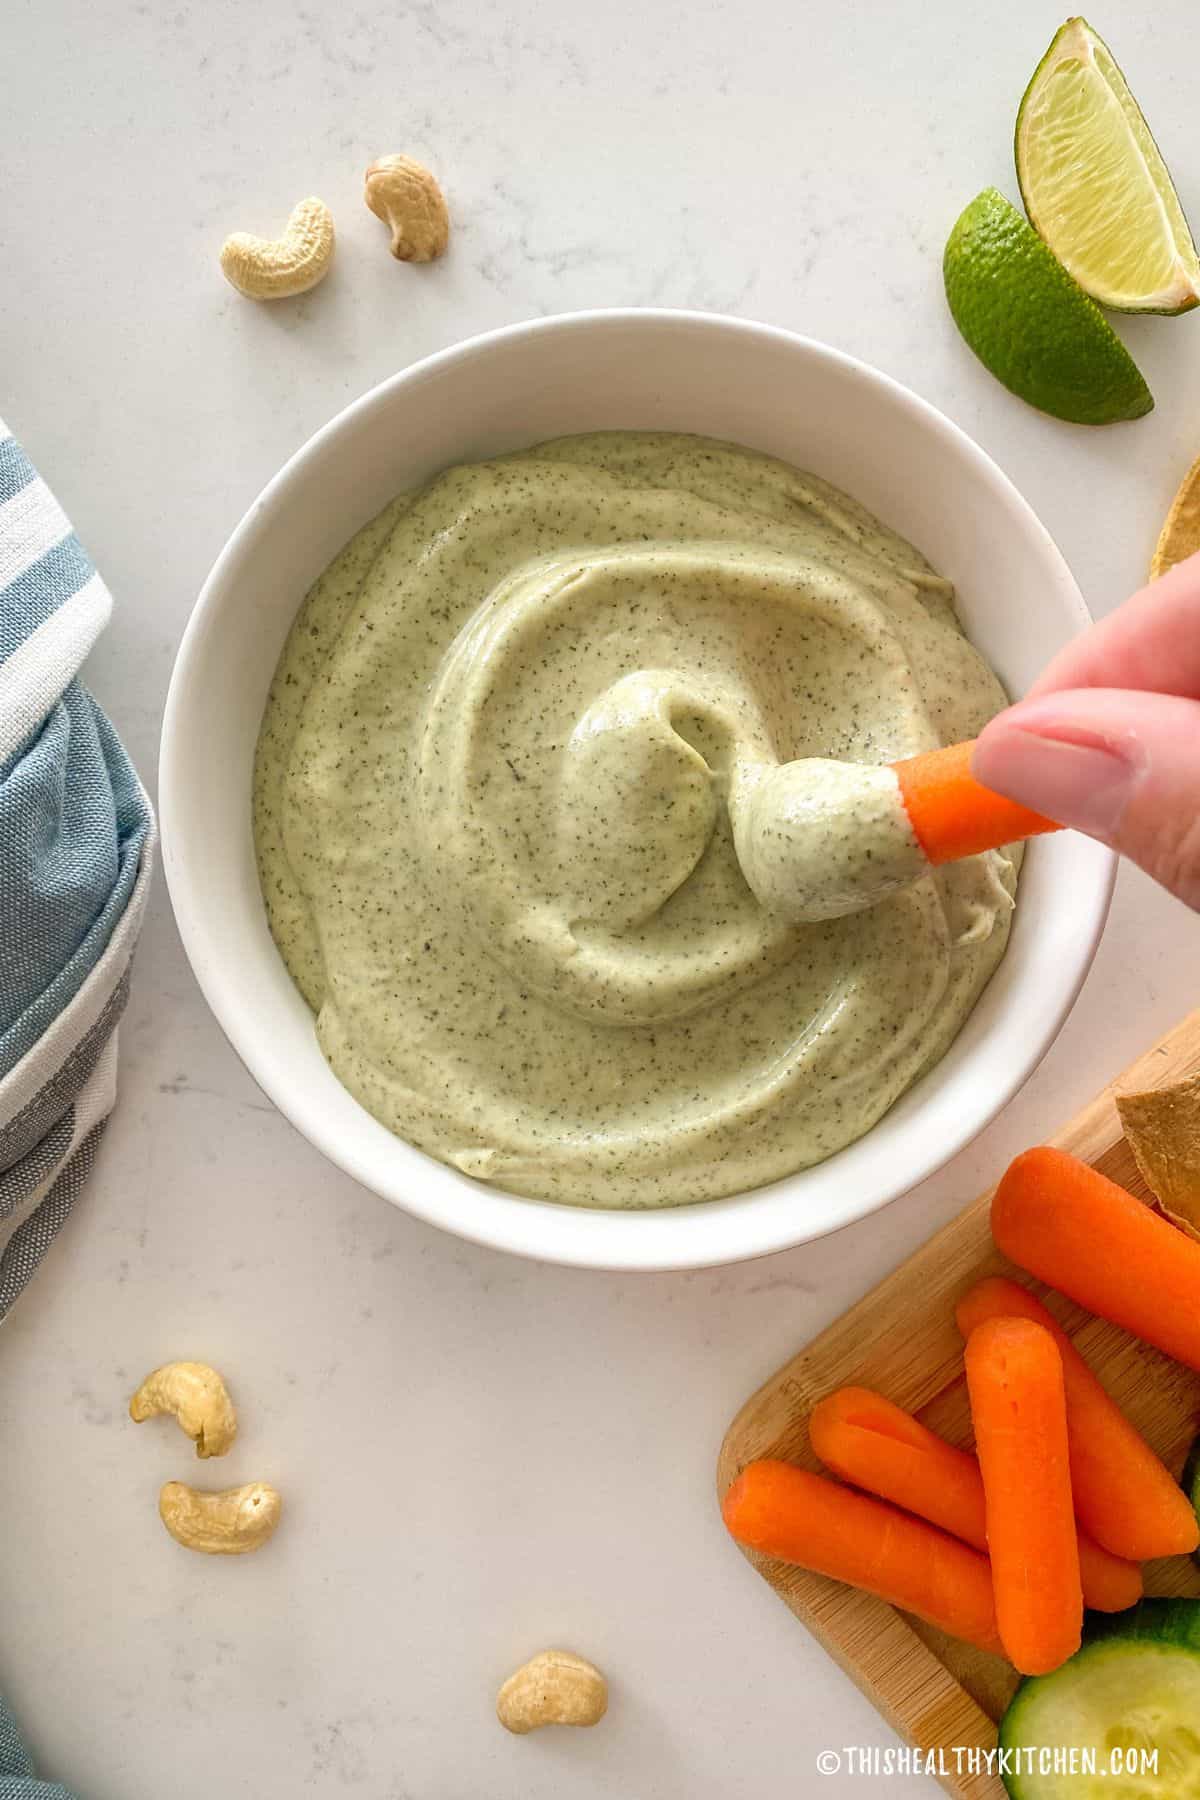 Vegan ranch dip in white bowl with carrot being dipped inside.